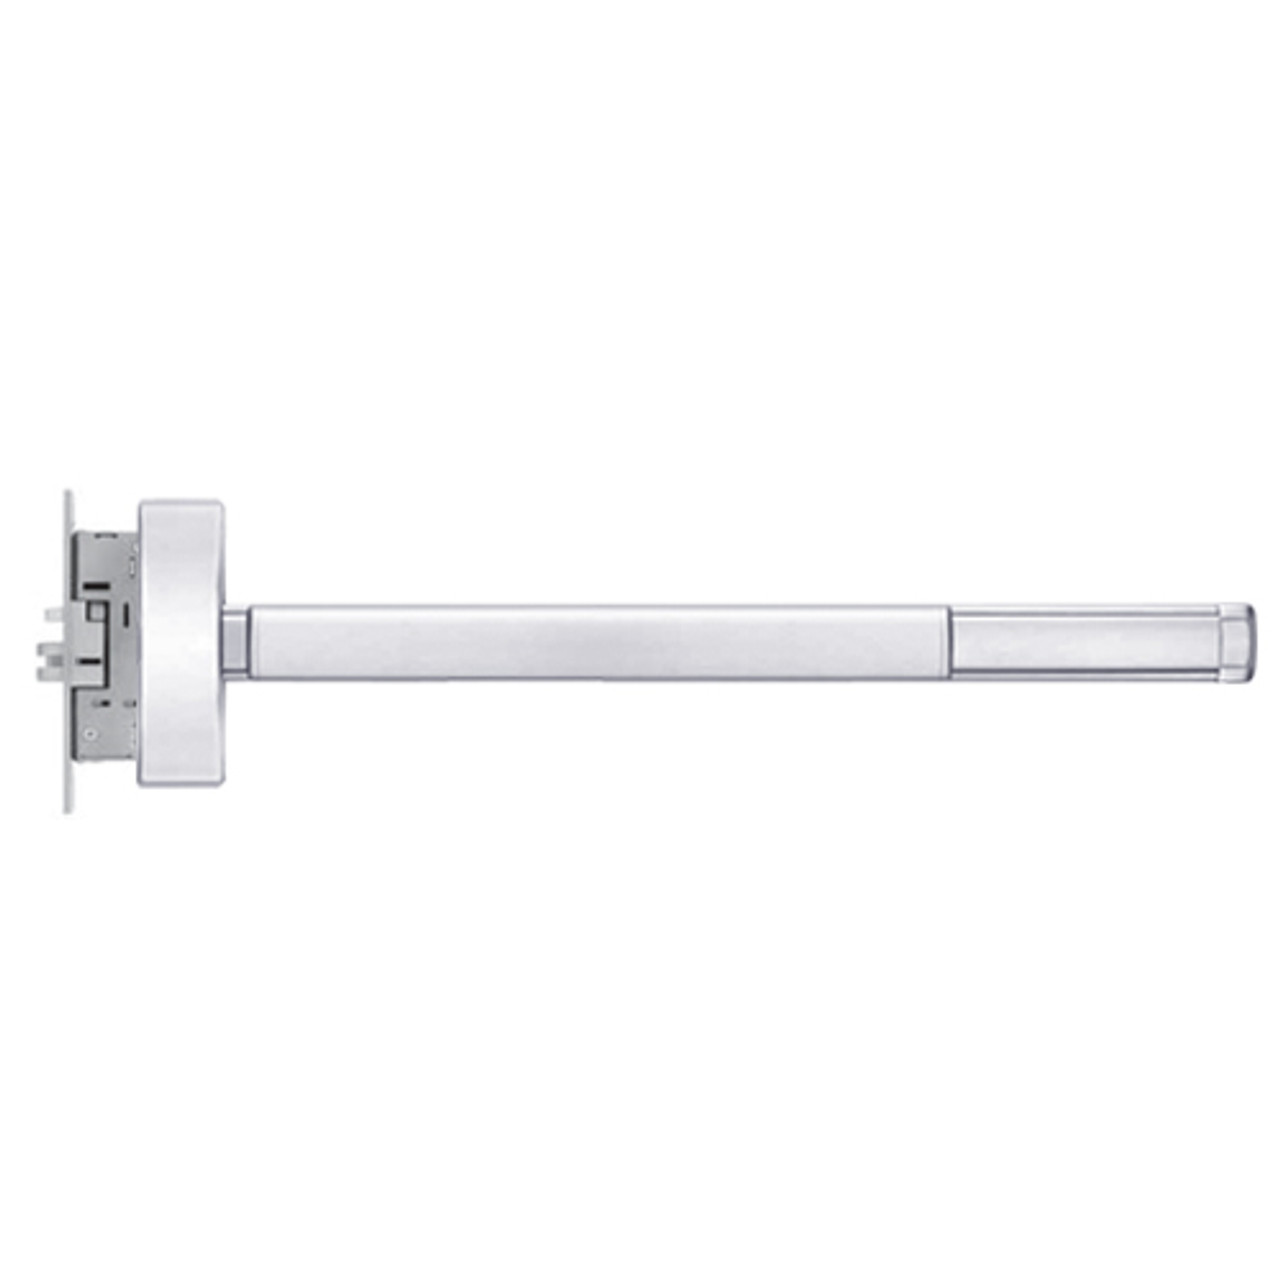 MLRFL2315-LHR-625-36 PHI 2300 Series Fire Rated Apex Mortise Exit Device with Motorized Latch Retraction Prepped for Thumb Piece Always Active in Bright Chrome Finish